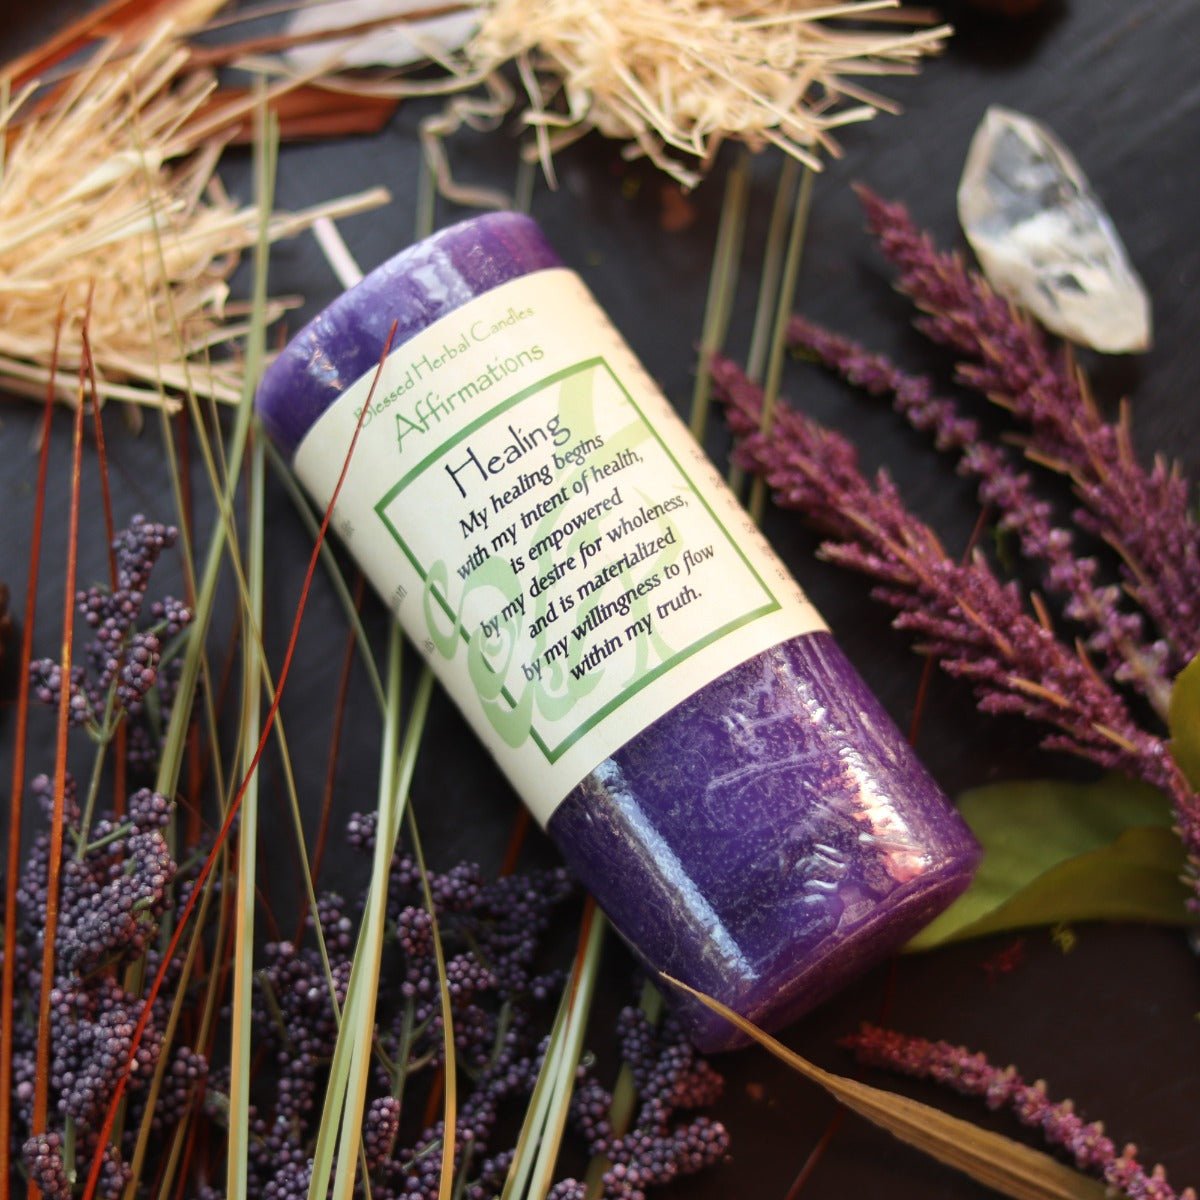 Healing Affirmation Candle - 13 Moons